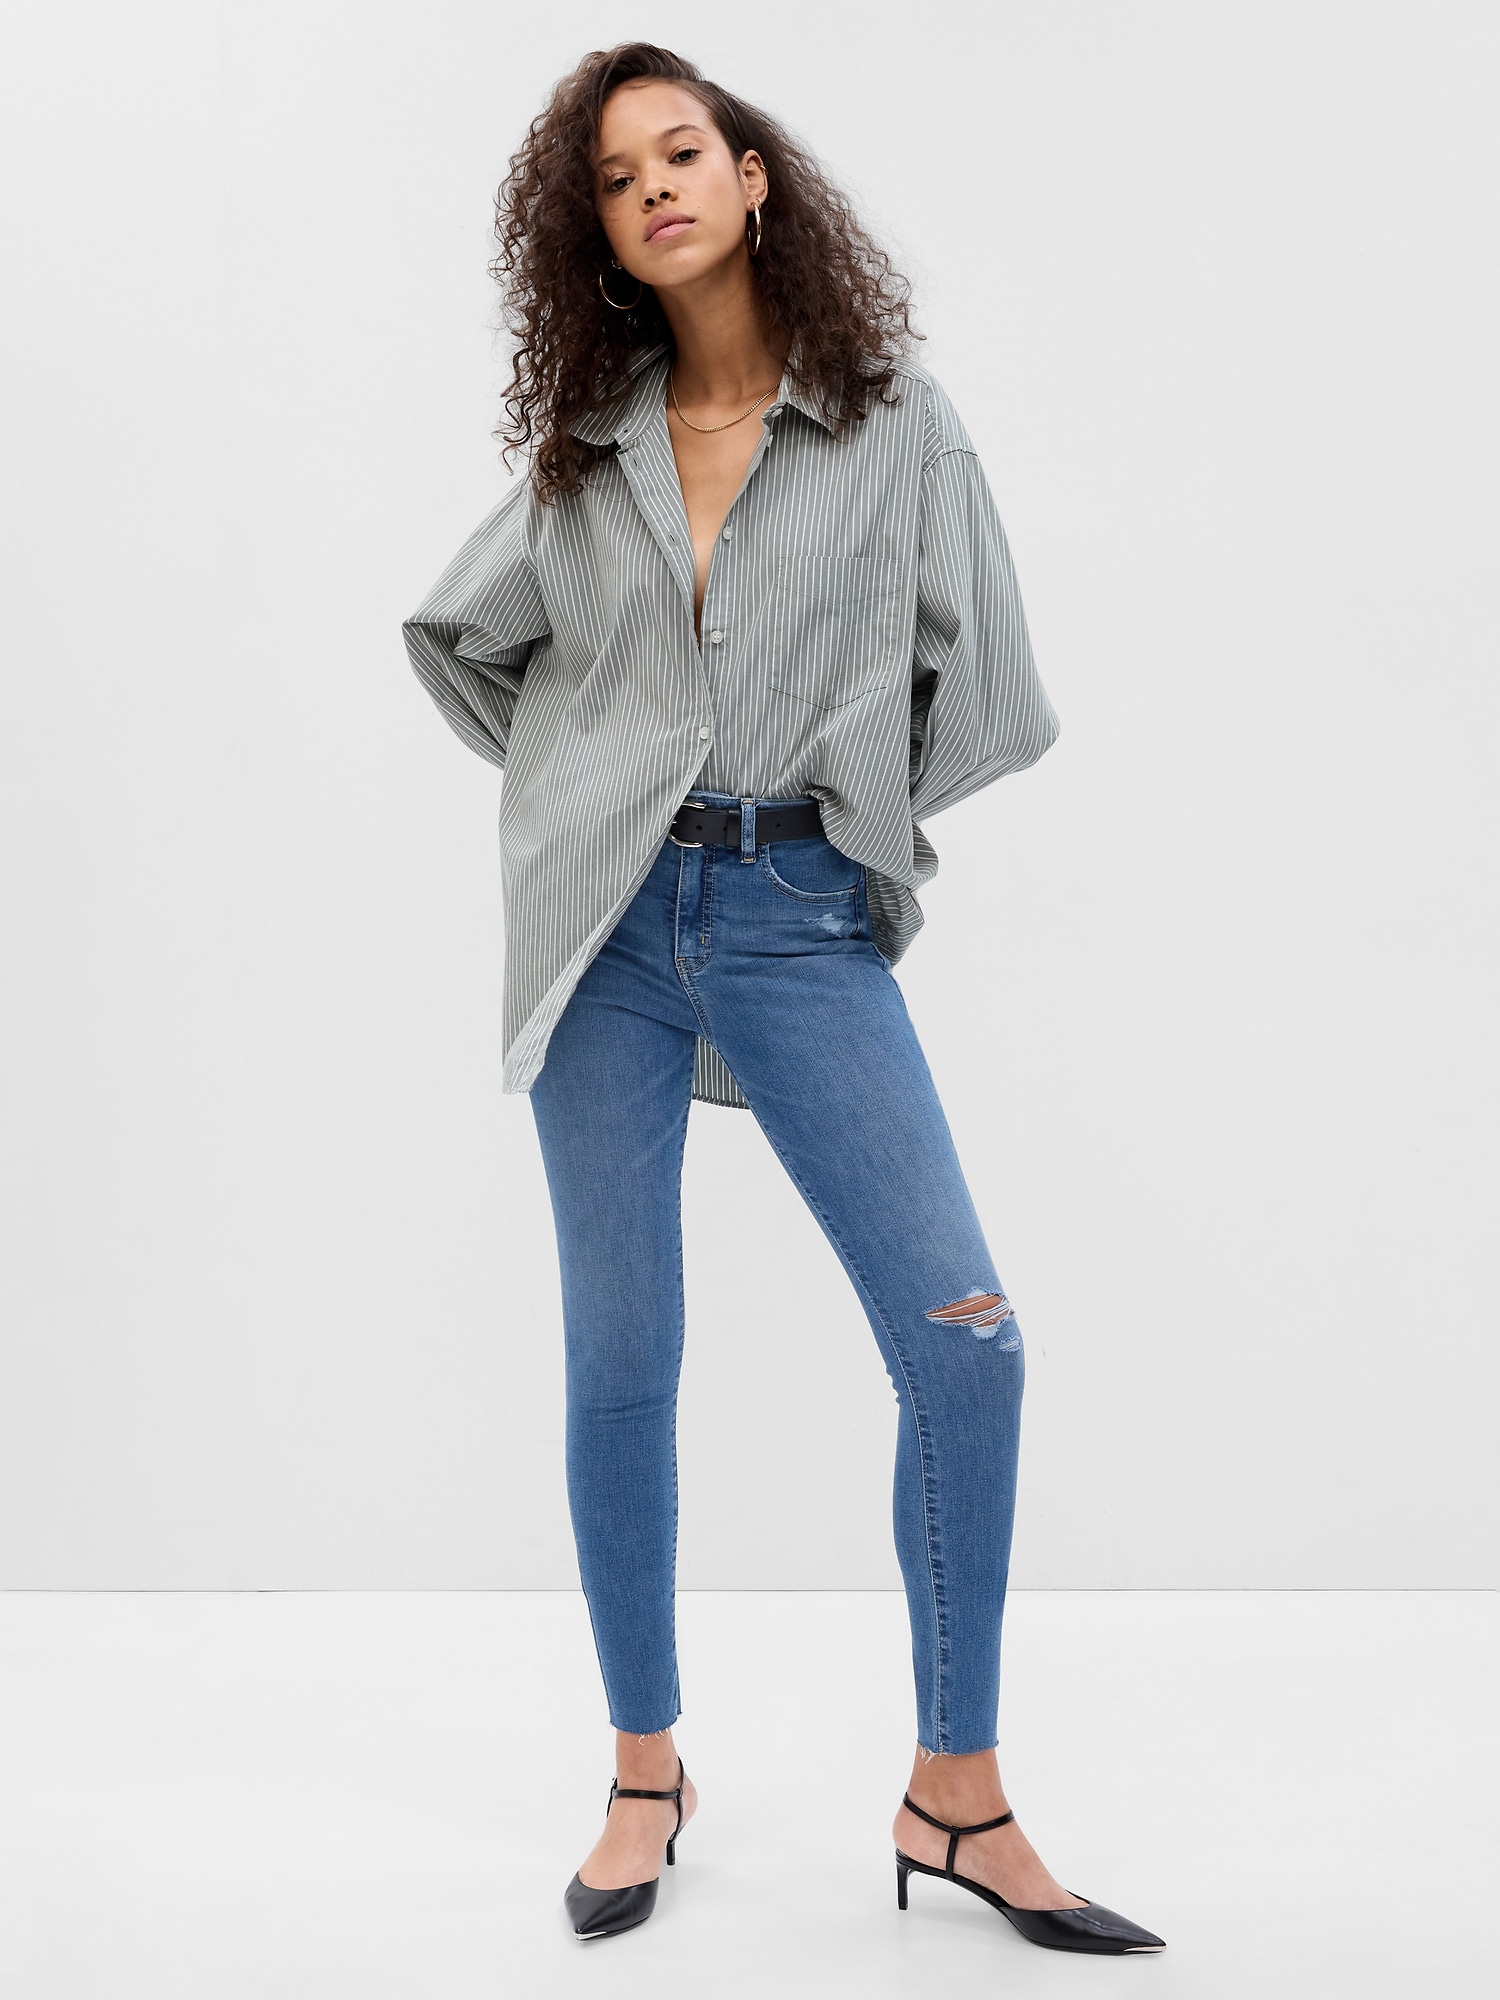 Buy Gap High Waisted Universal Legging Jeans from the Laura Ashley online  shop